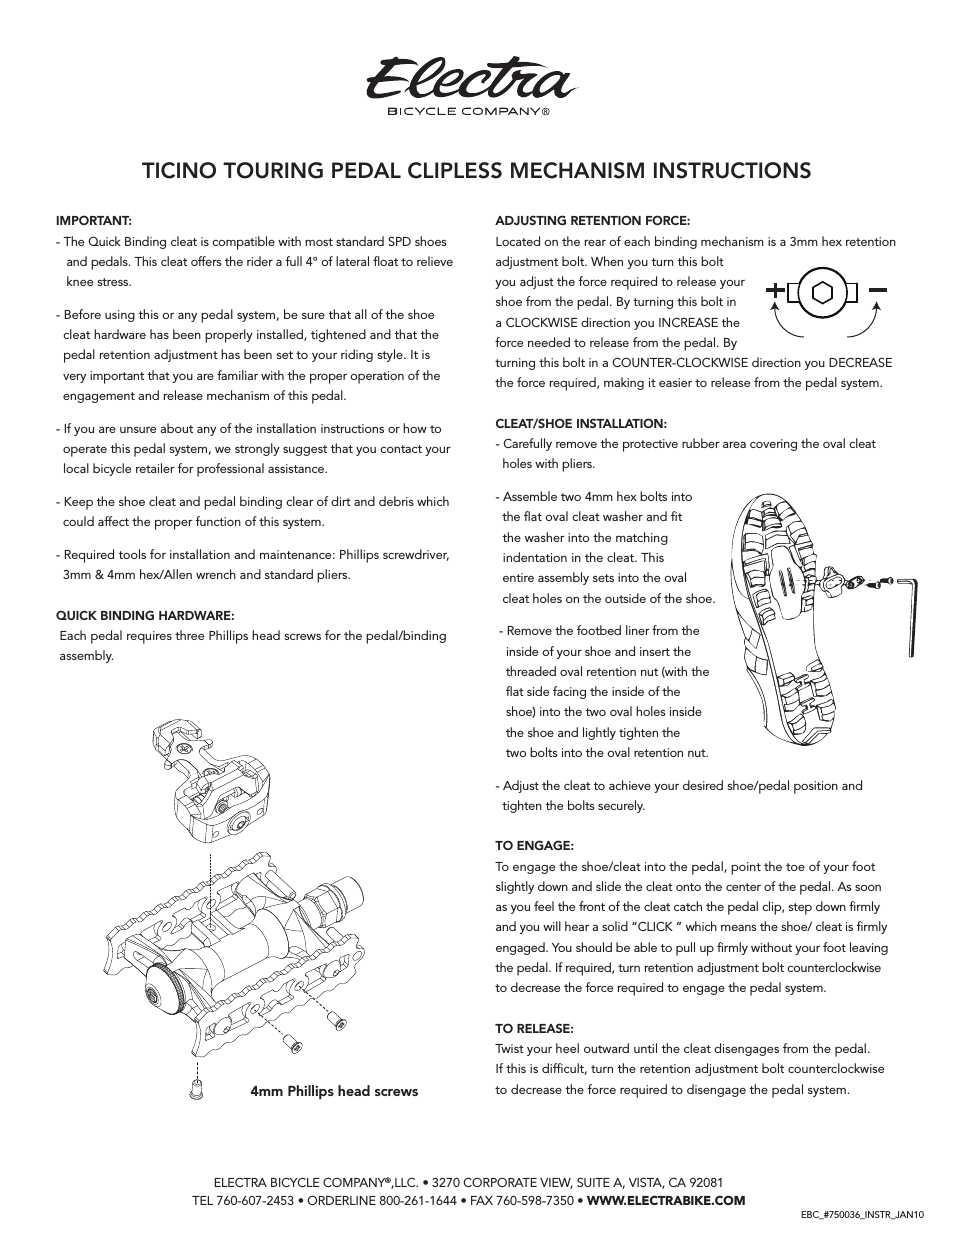 Ticino Touring Pedal Clipless Mechanism